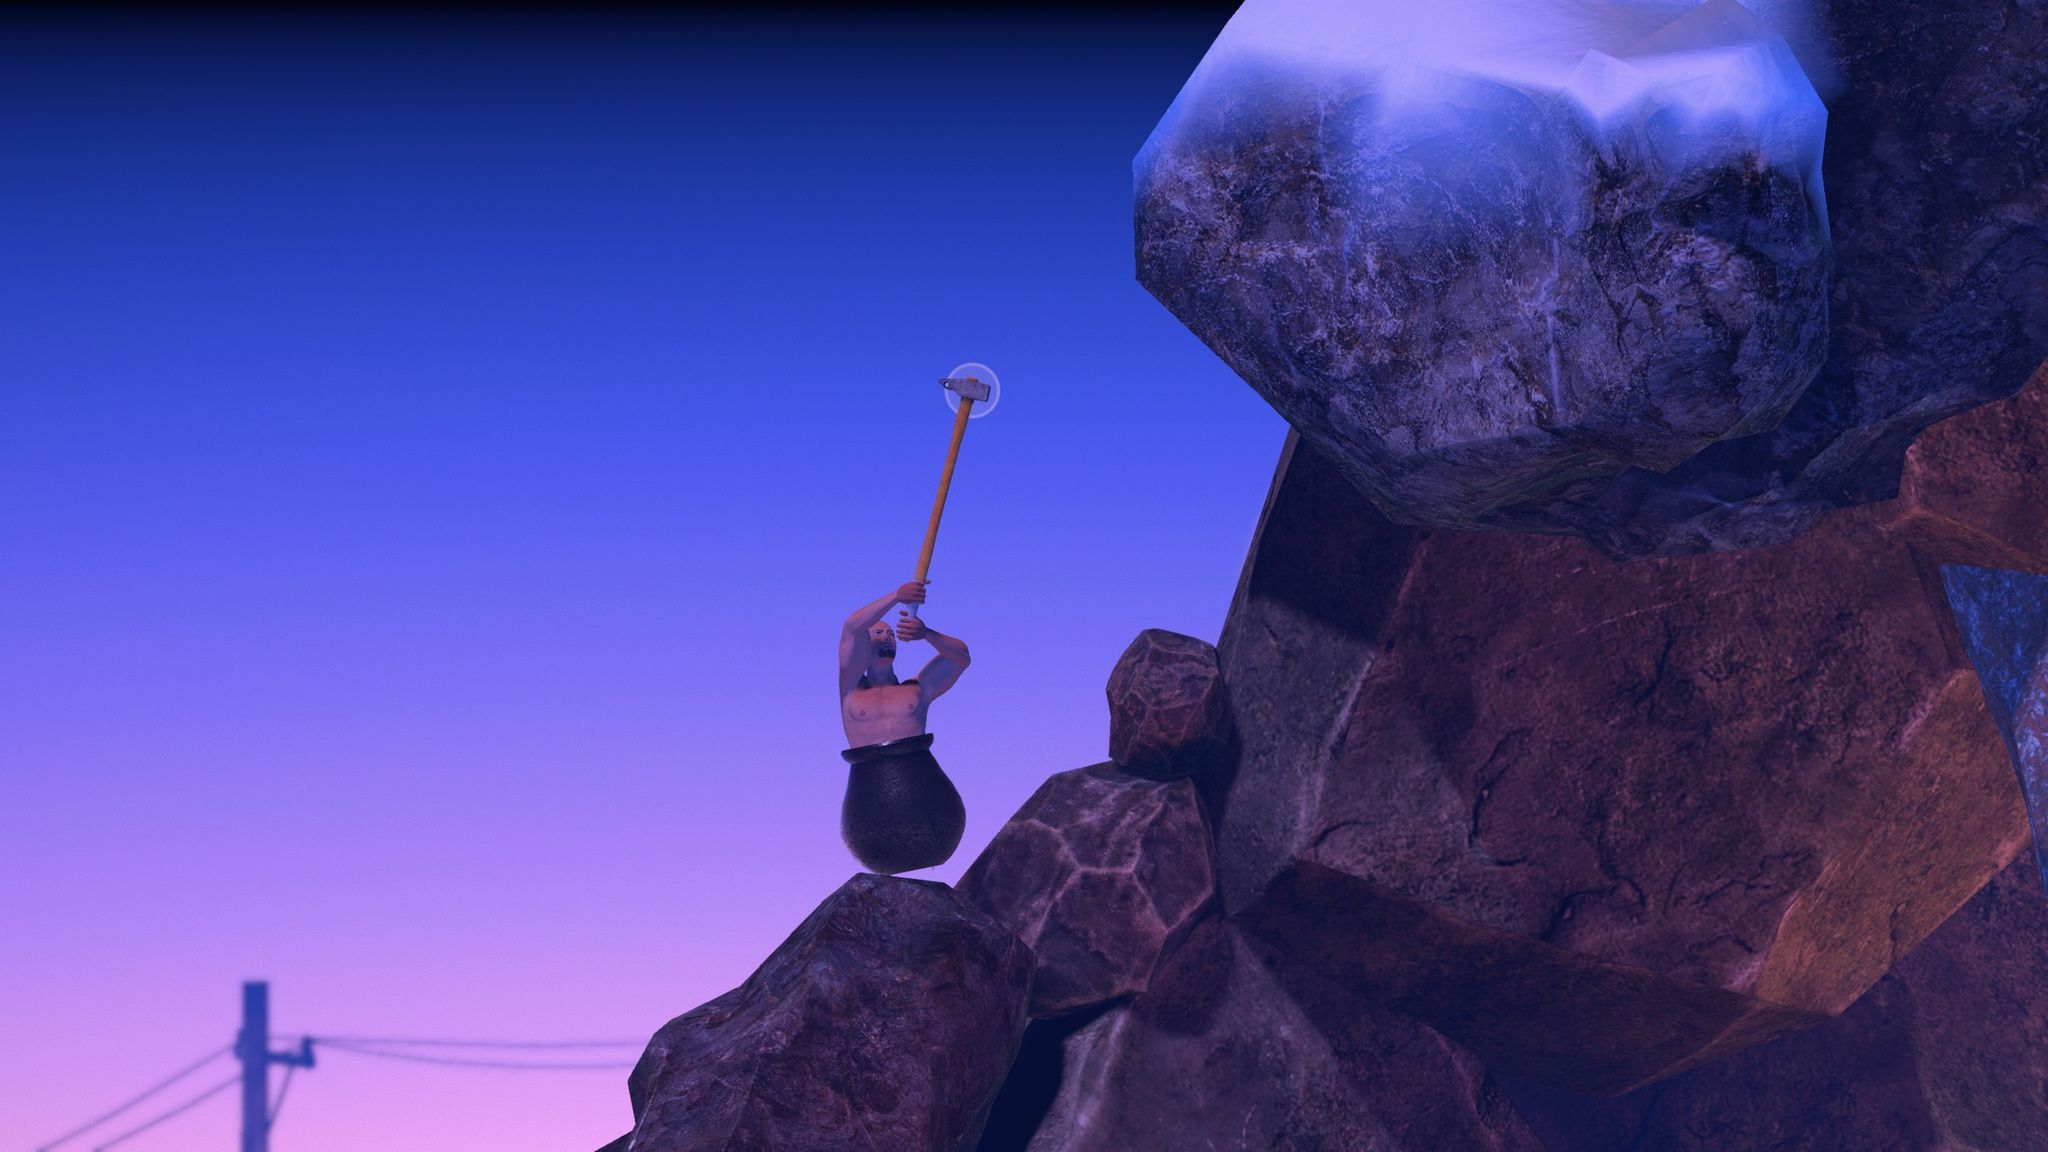 getting over it game download mac safe